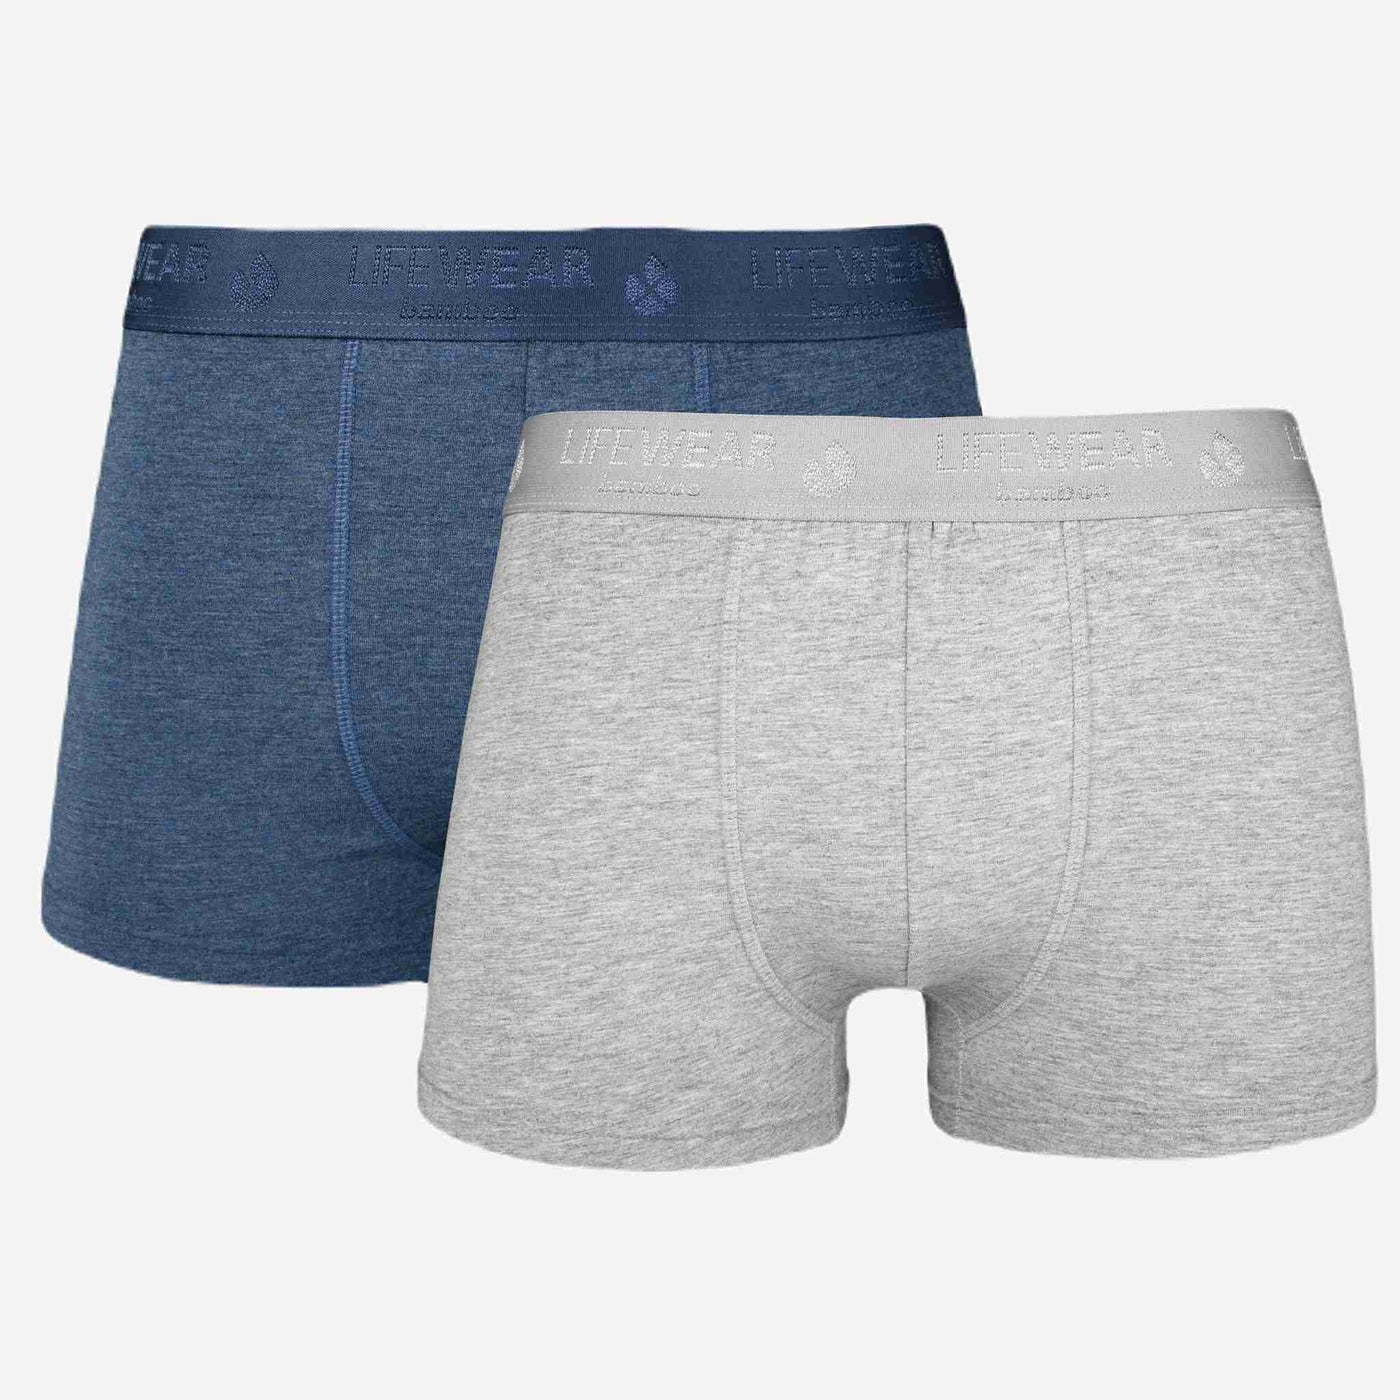 Mens gray and blue bamboo boxer briefs